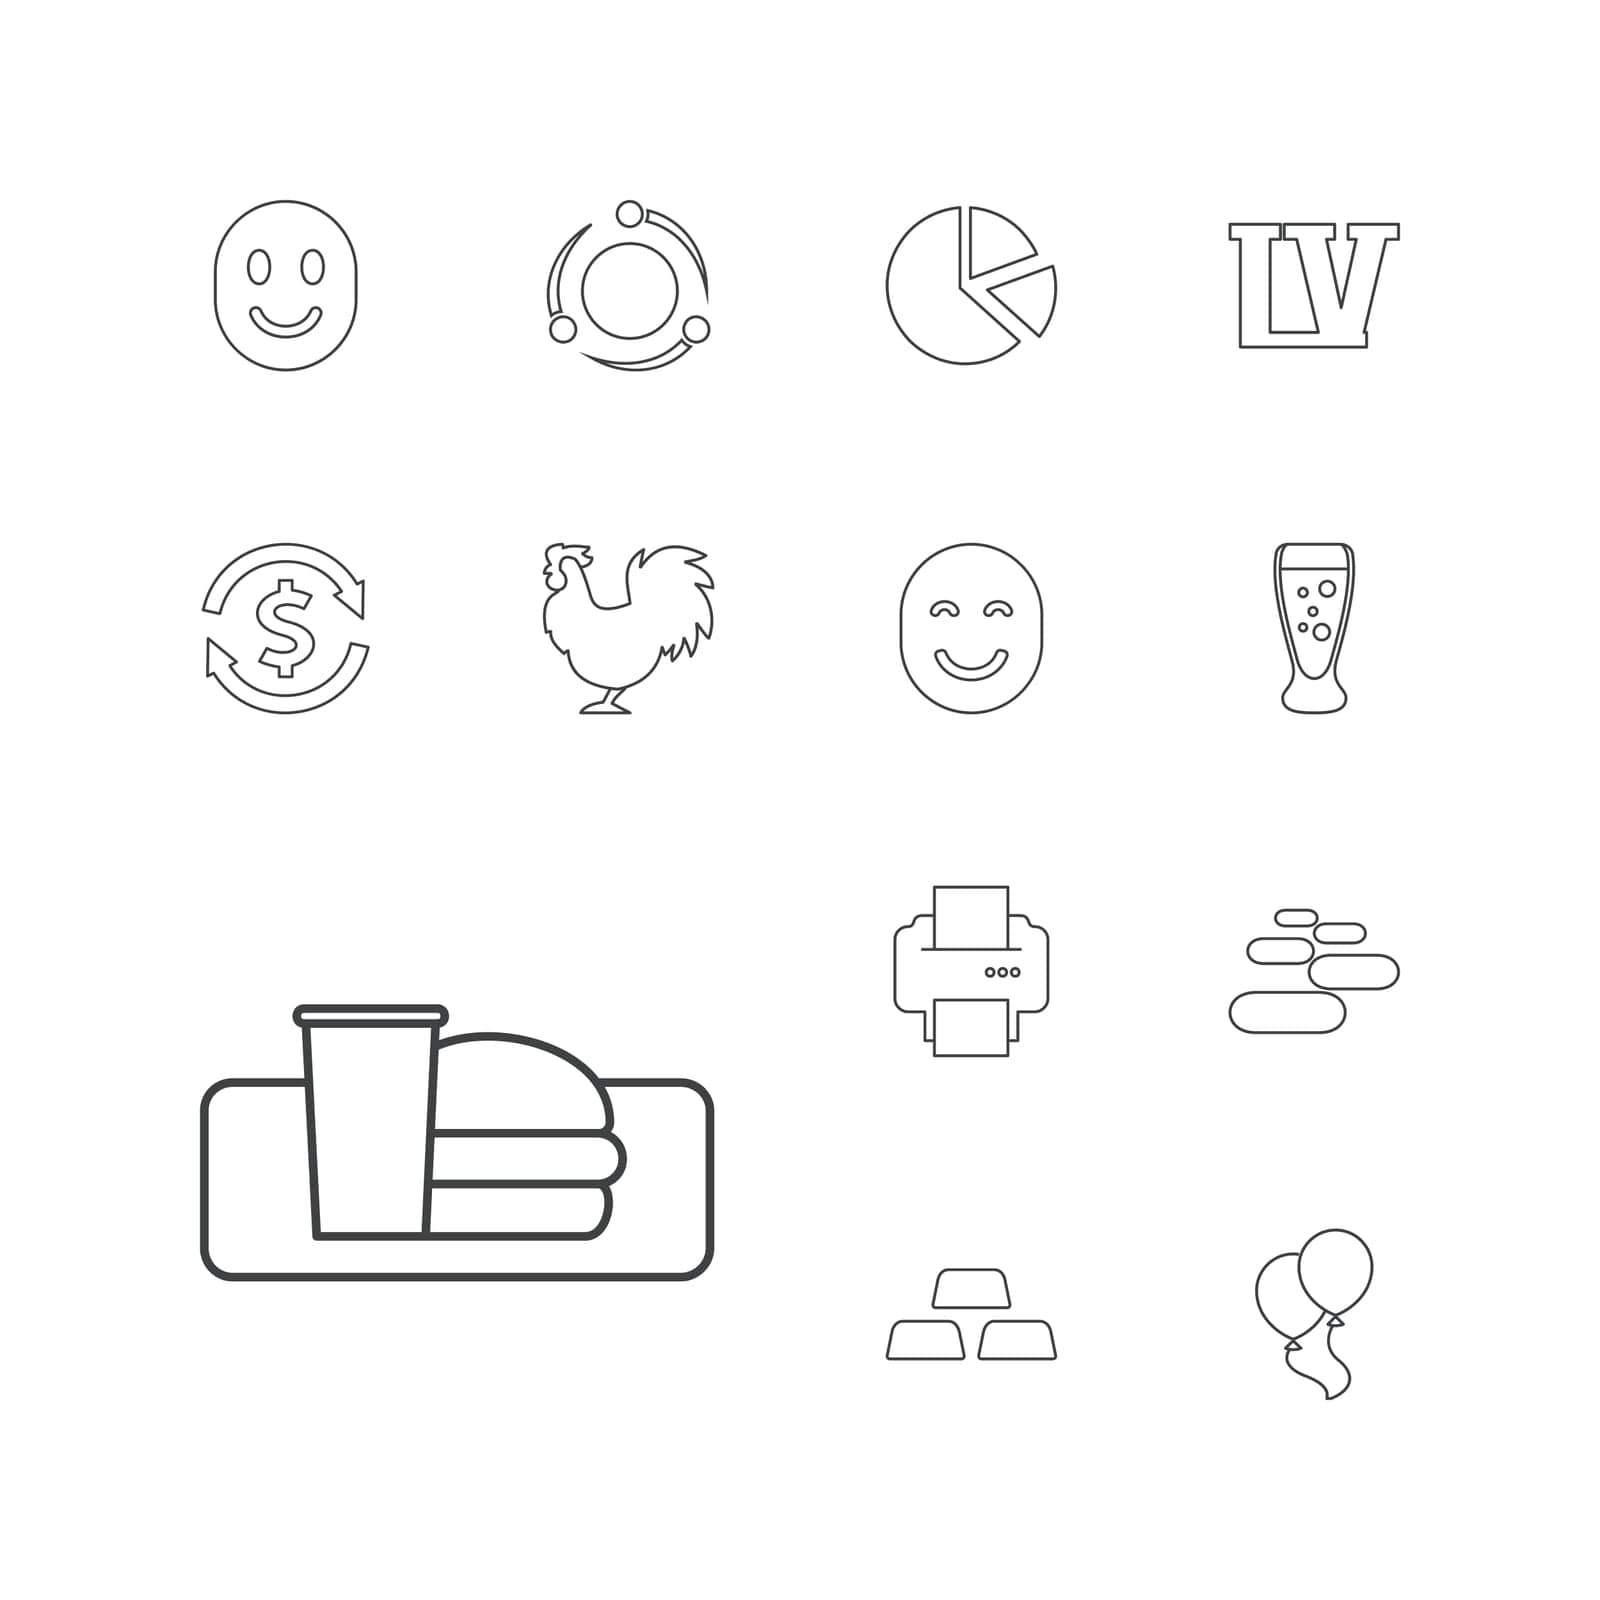 symbol,chicken,happy,concept,icon,sign,isolated,pie,gold,character,white,burger,and,design,vector,graphic,element,smiley,glass,balloon,smiling,emot,art,set,shape,business,vegas,spa,printer,black,milk,investment,abstract,soda,stone,money,background,exchange,illustration,atom,chart,fun,object by ogqcorp